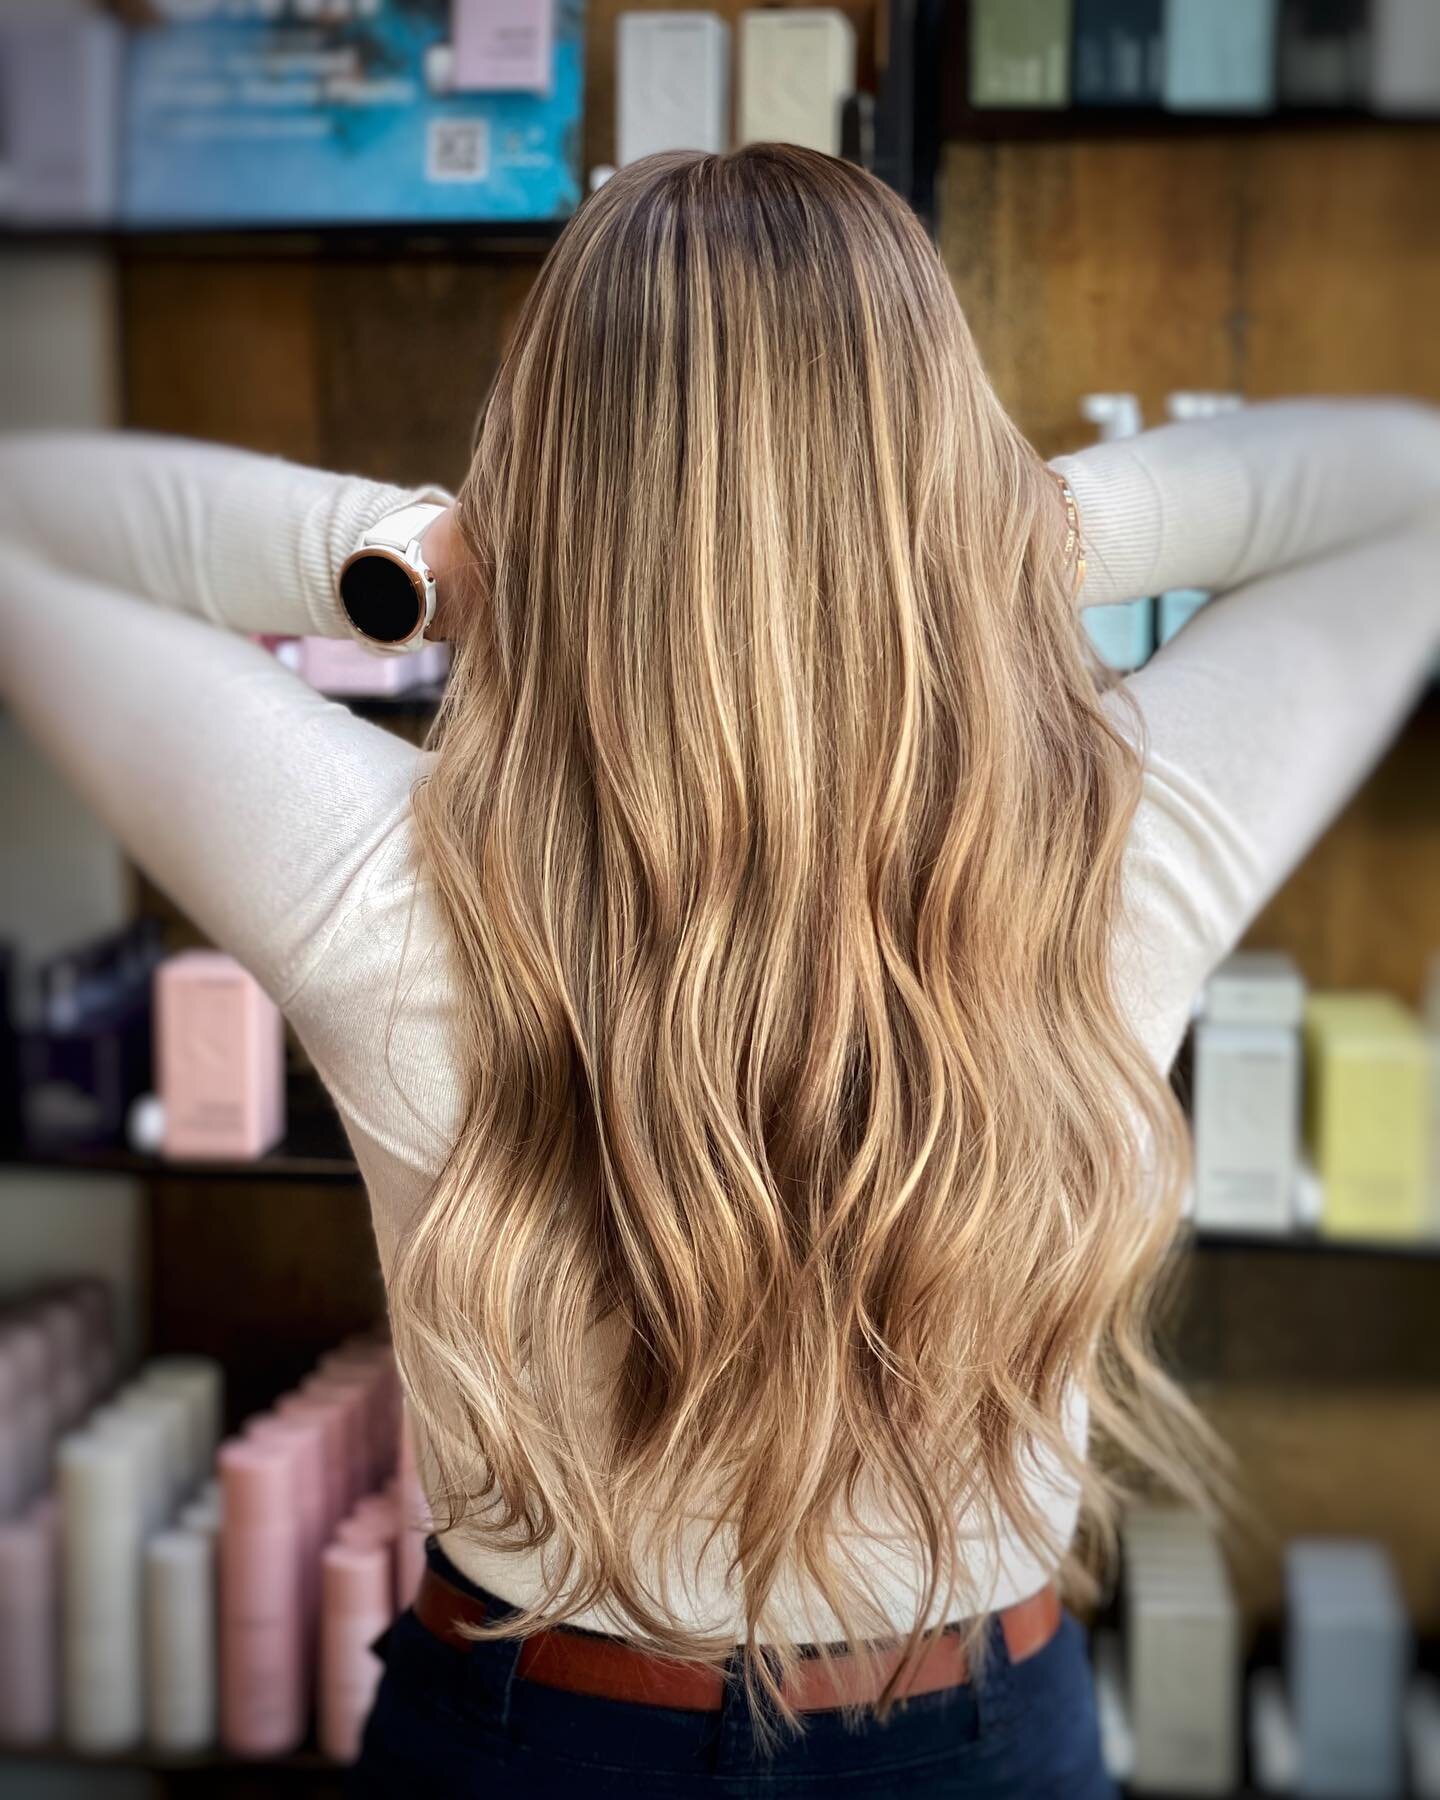 The type of hair that makes you want to go out and show it off 💁🏼&zwj;♀️

Now go out this weekend and show off your fabulous hair by one of the talented @lemondropsalon_bend stylists! And don&rsquo;t forget to tag us ✨